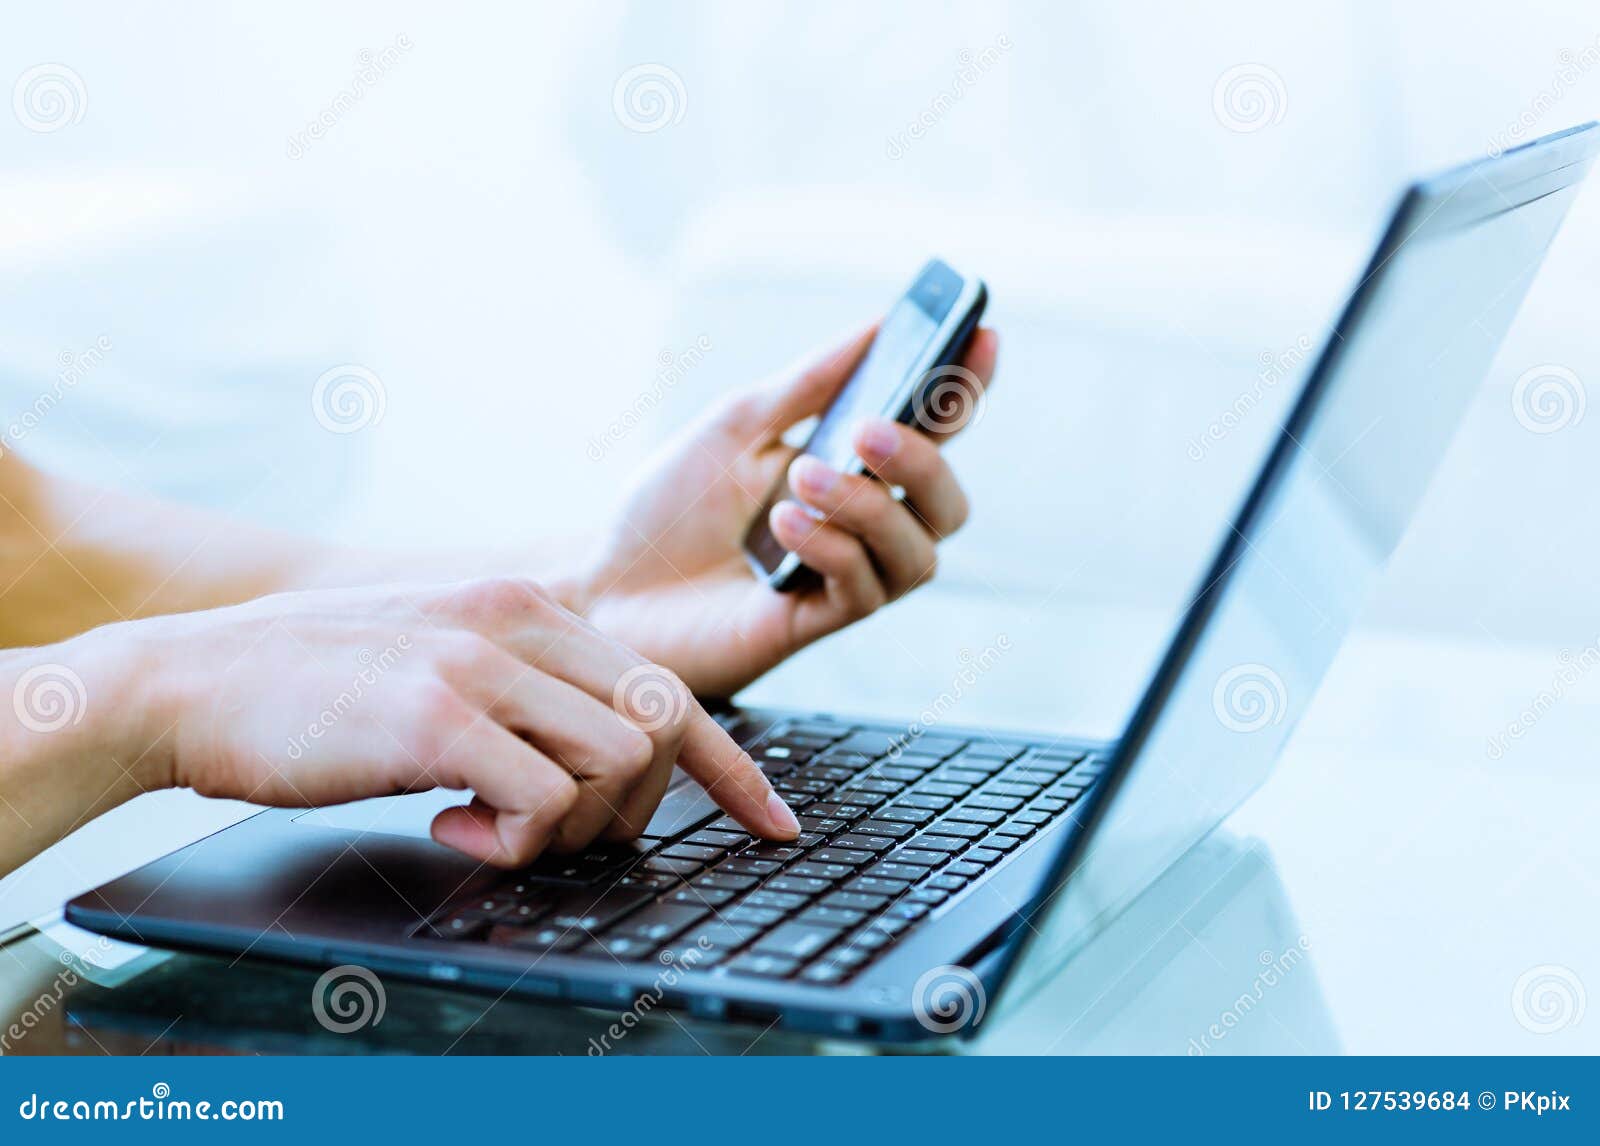 close-up of hands typing on laptop computer while using a cell phone.